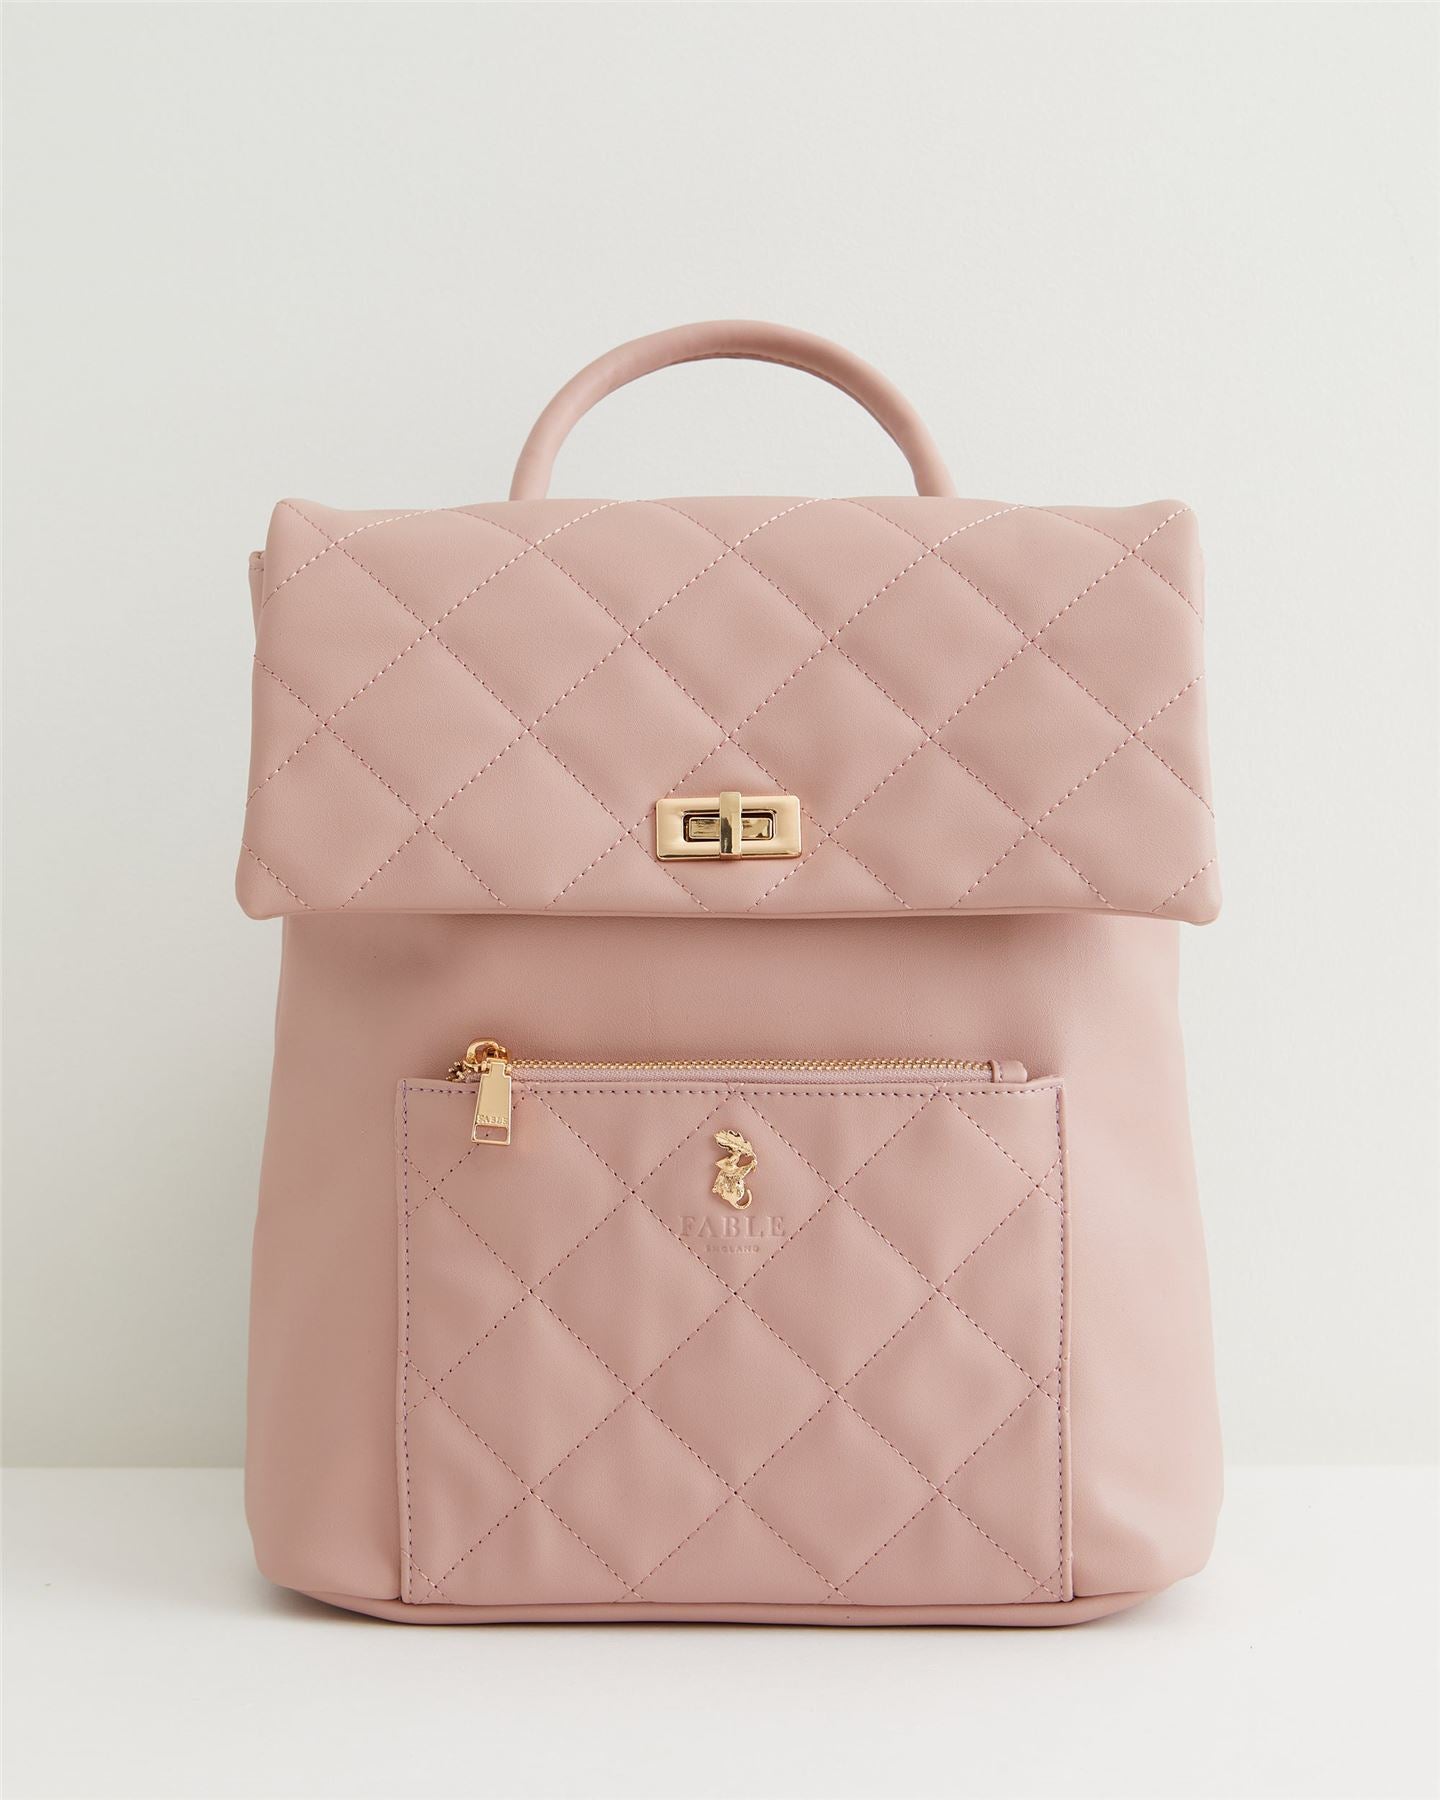 Fable Poetic Pink Quilted Backpack